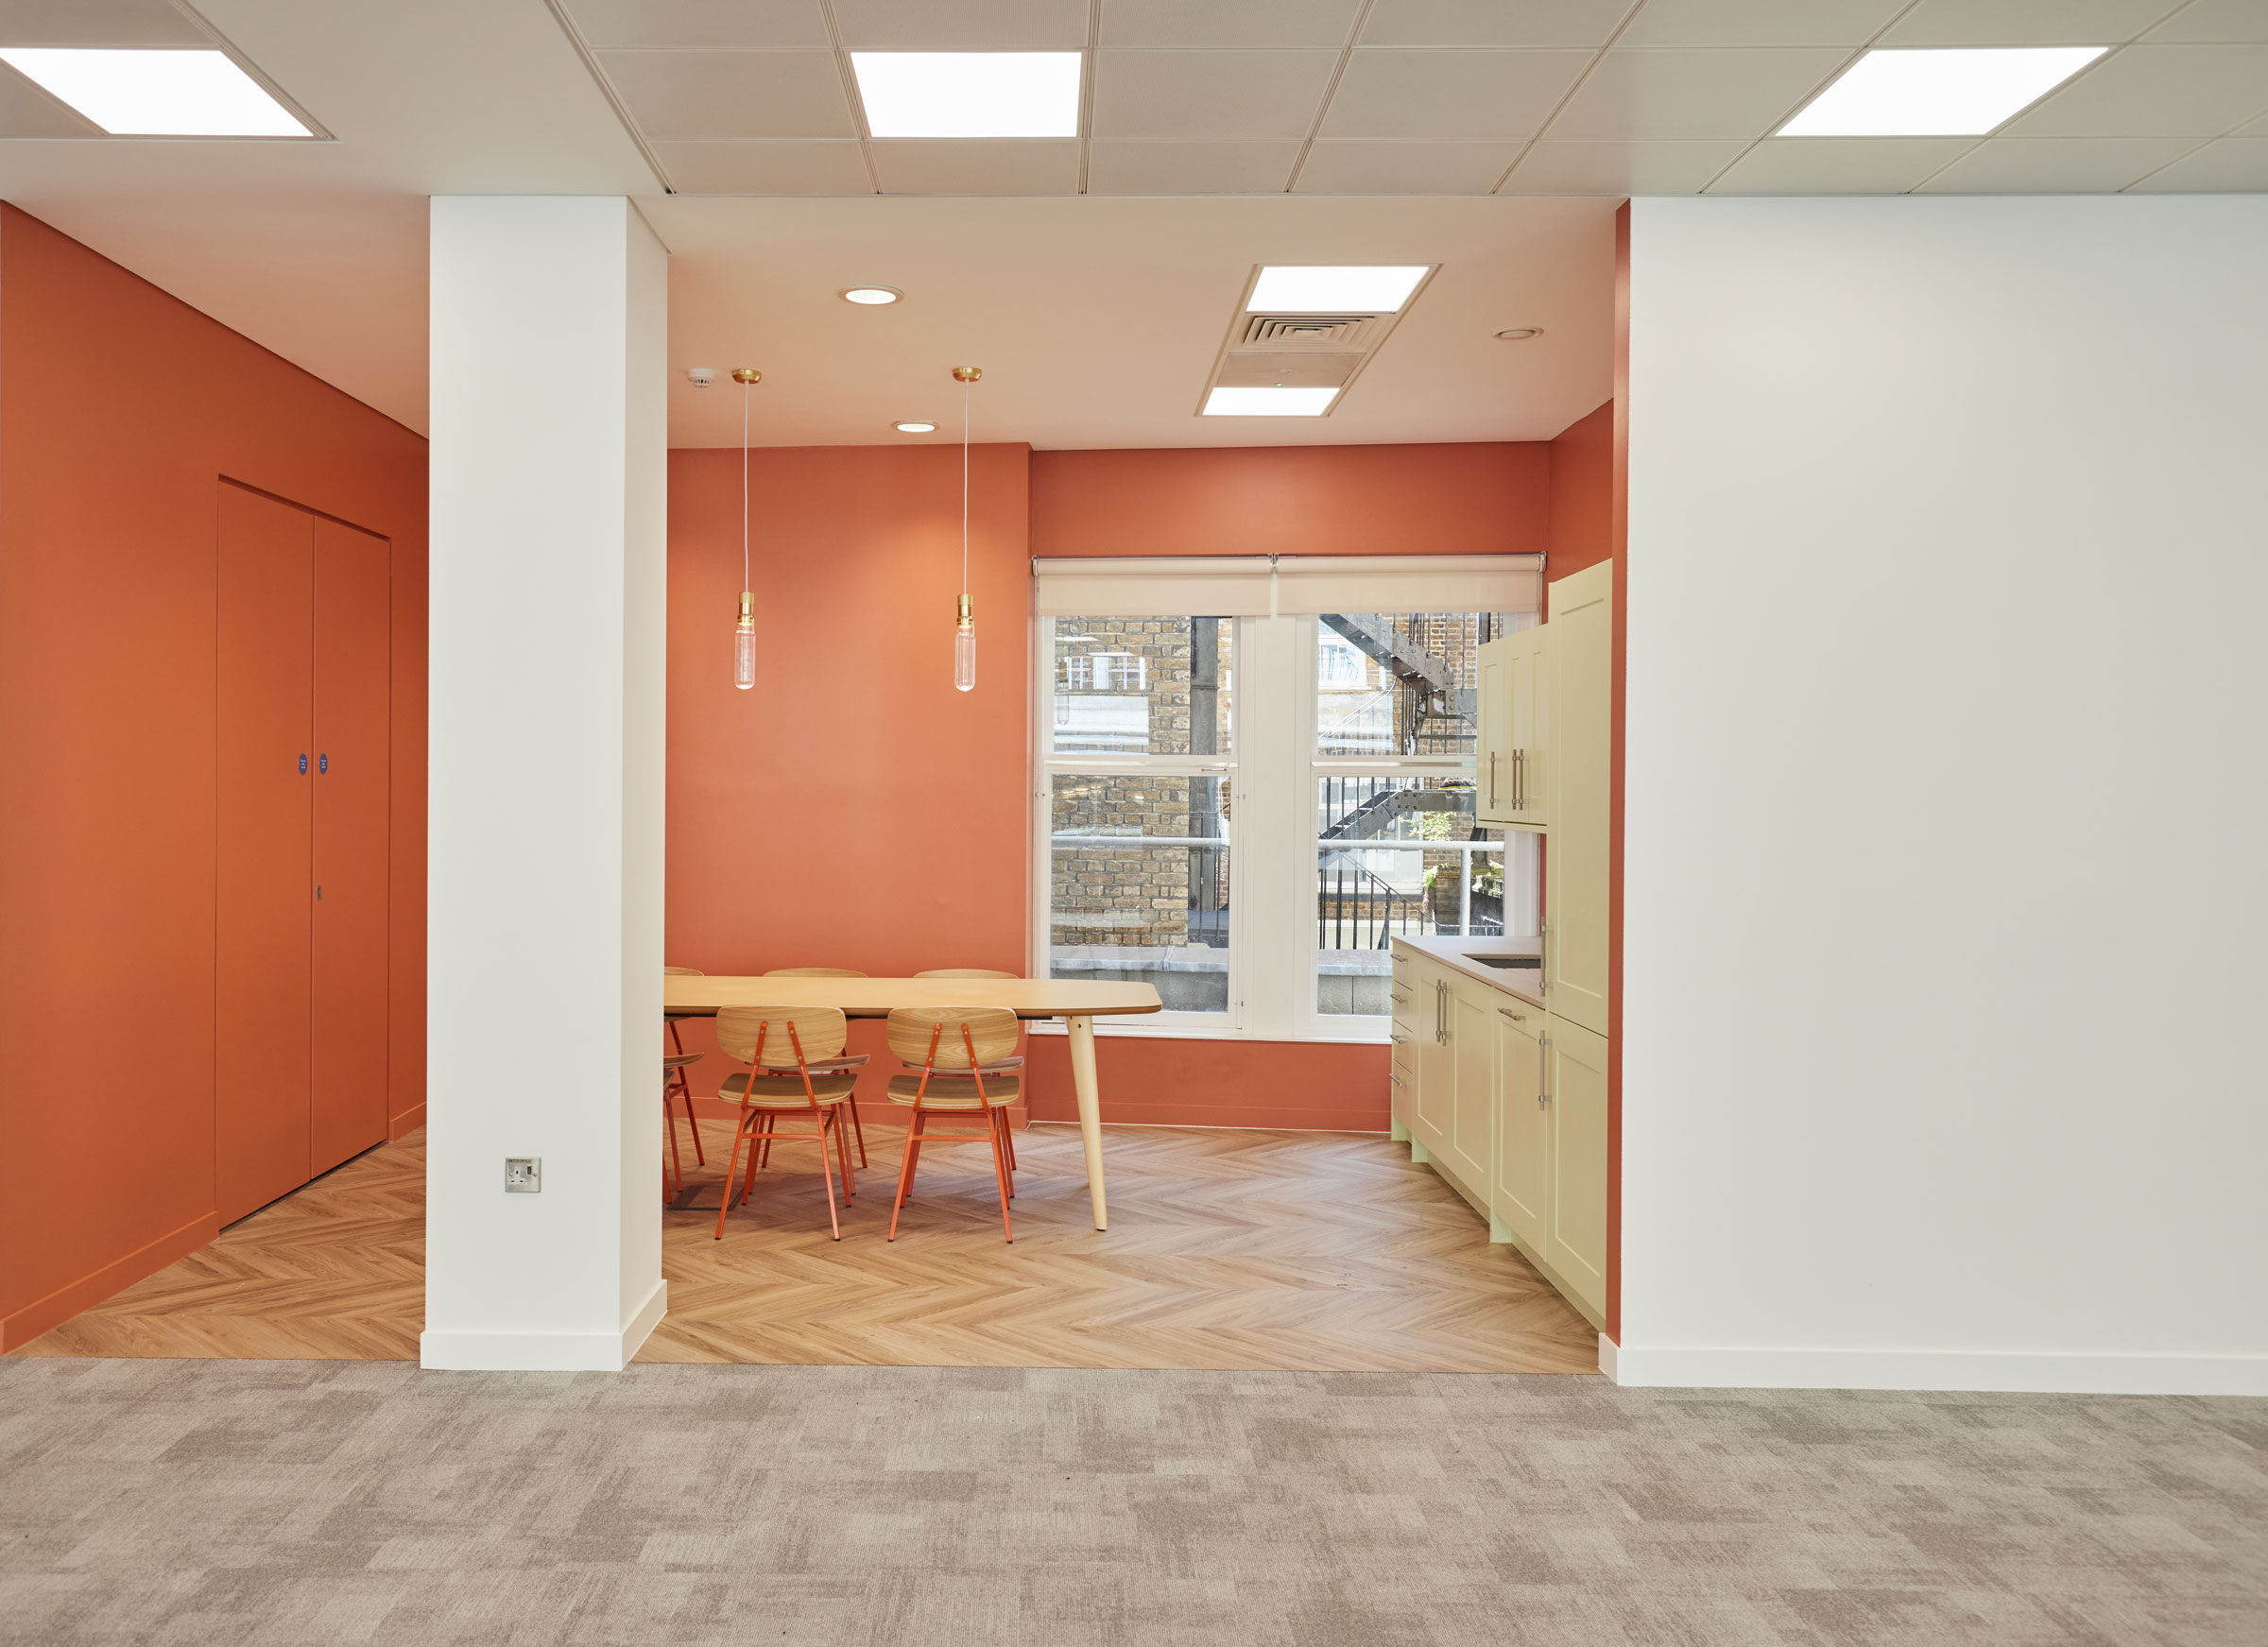 Tea point and social space with salmon pink wallpaper and wooden flooring